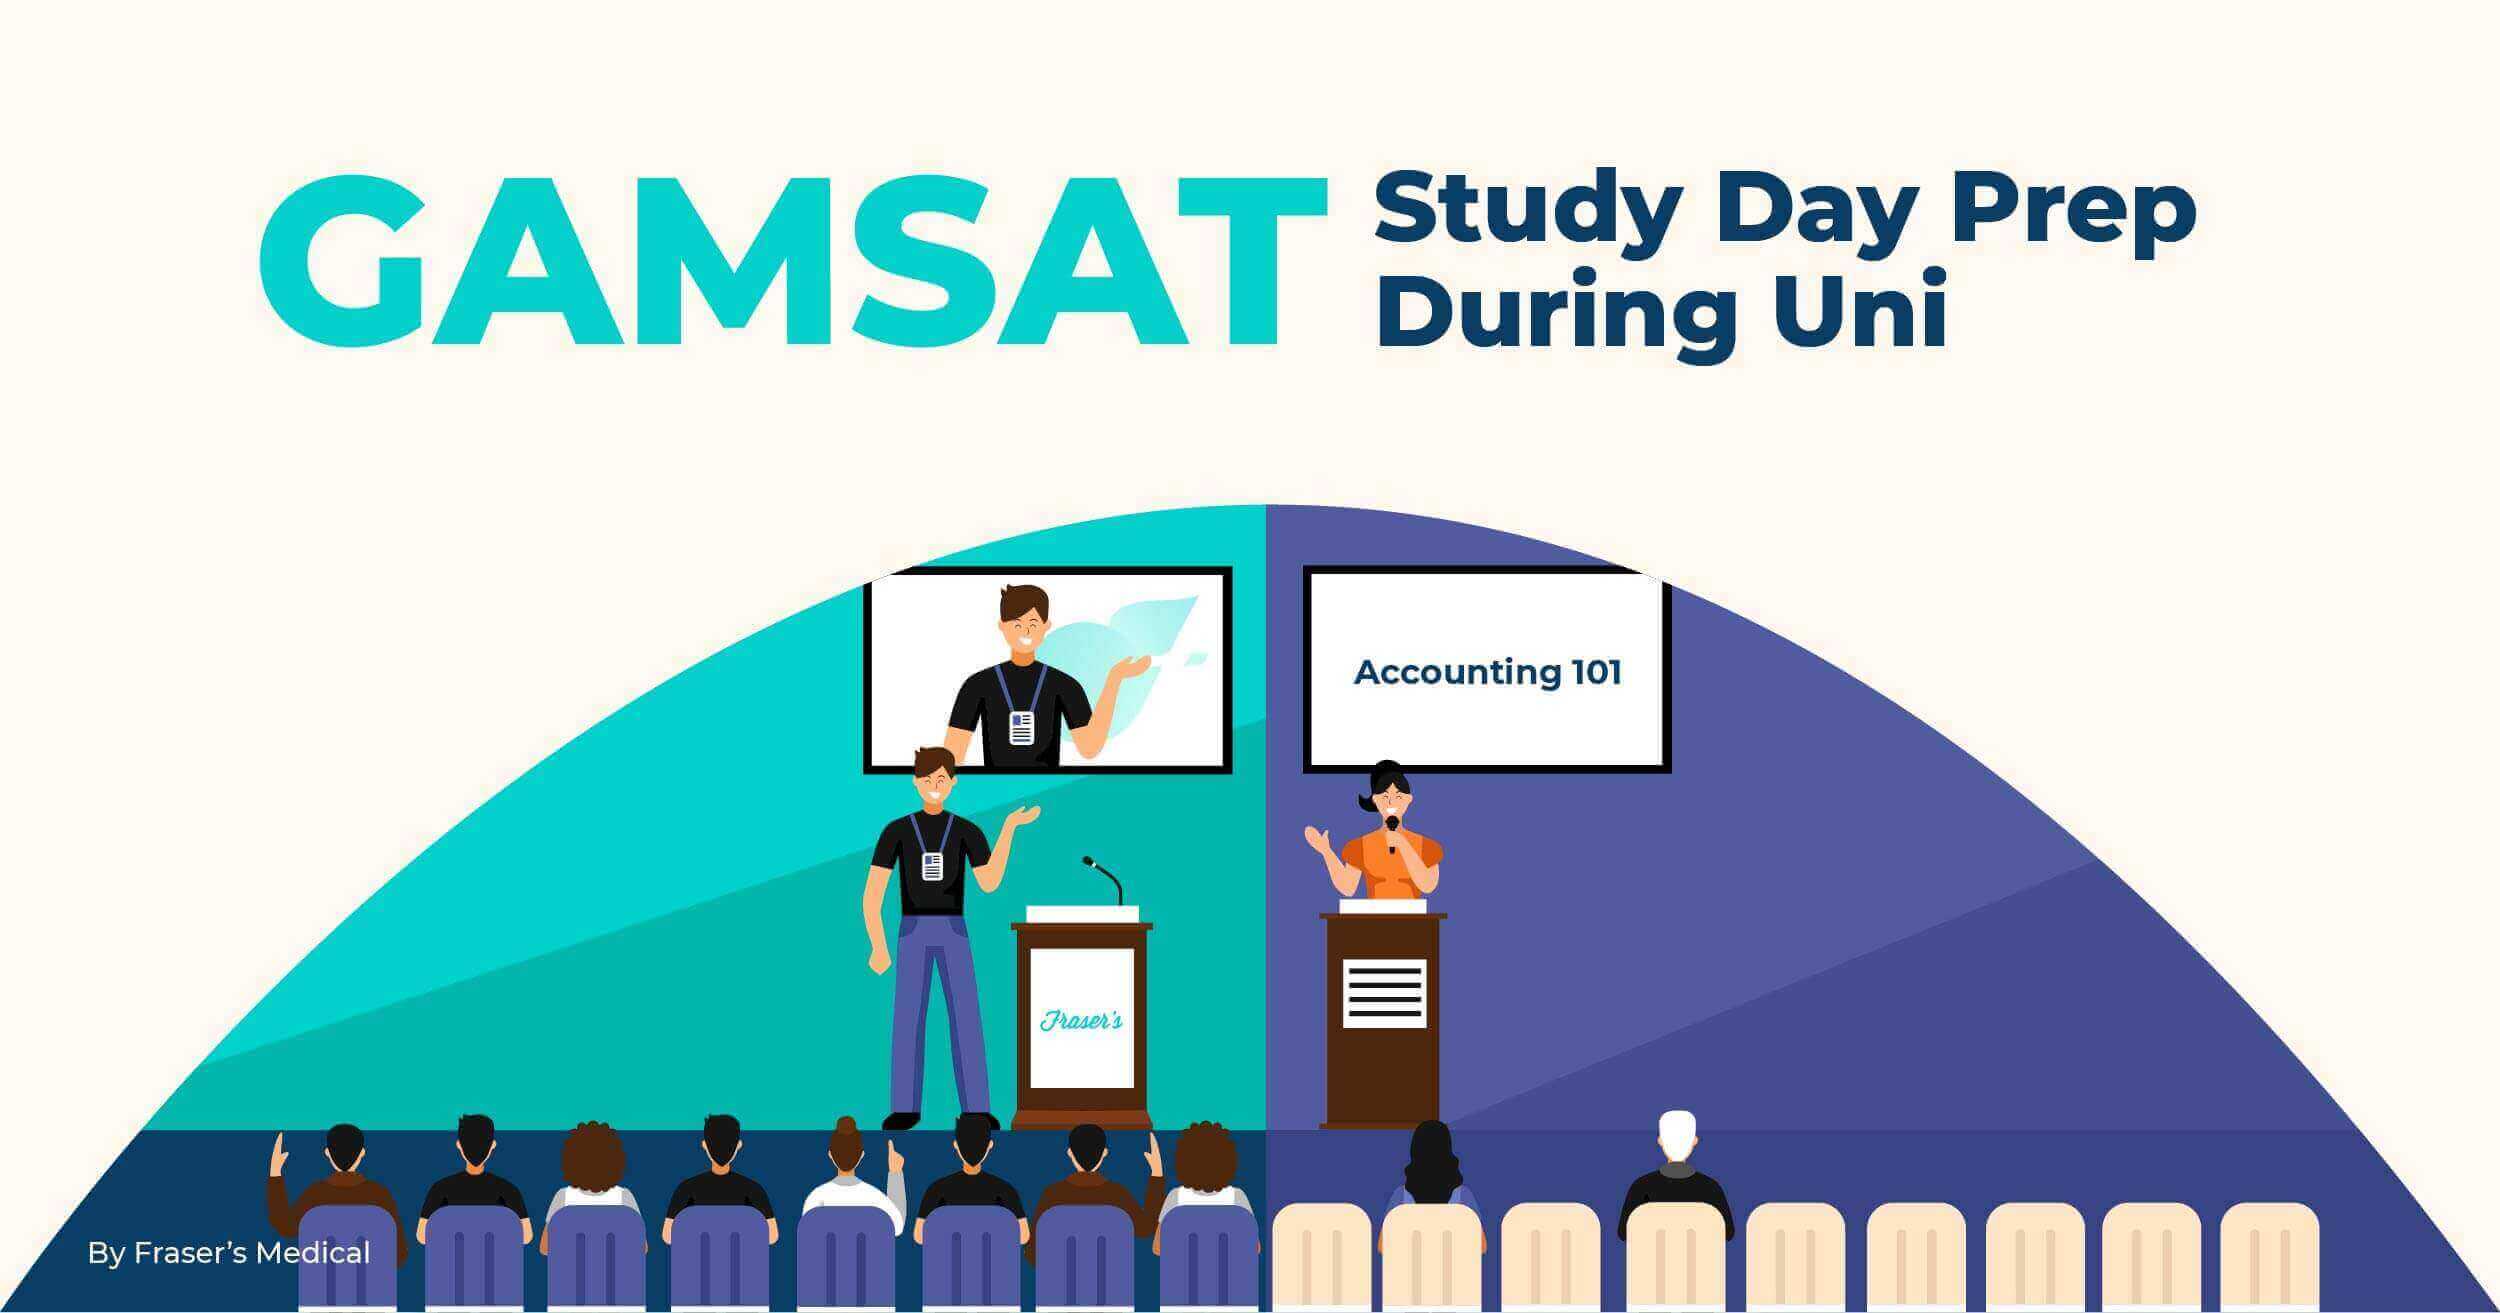 How to Balance University Preparation With GAMSAT Study featured image